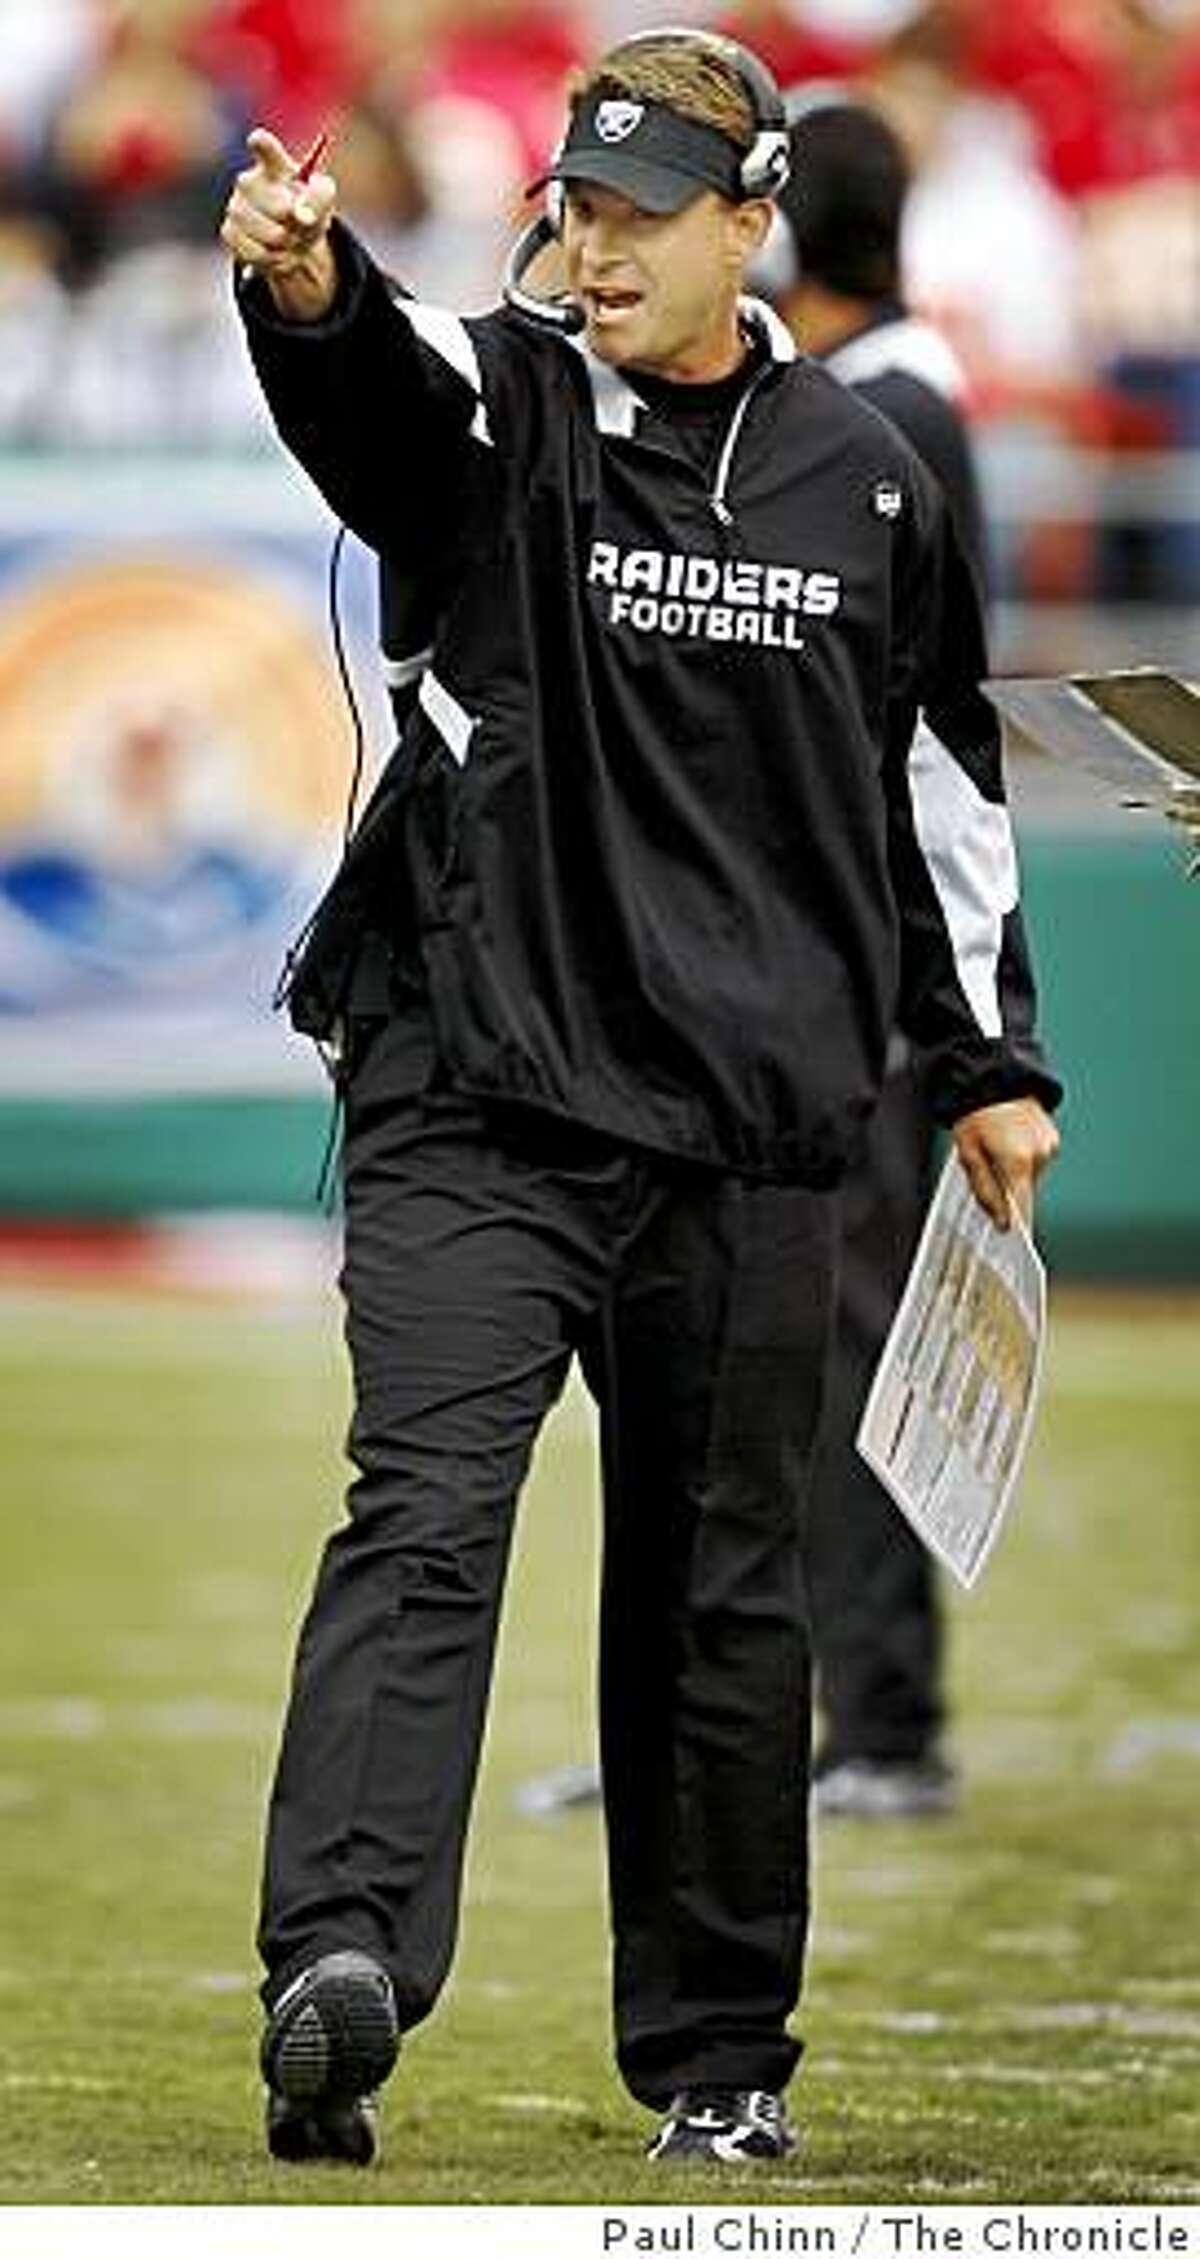 Head coach Lane Kiffin approved of a Chiefs holding penalty resulting in a Raiders first down in the second quarter of the Oakland Raiders vs. Kansas City Chiefs football game at Arrowhead Stadium in Kansas City, Mo., on Sunday, Sept. 14, 2008.